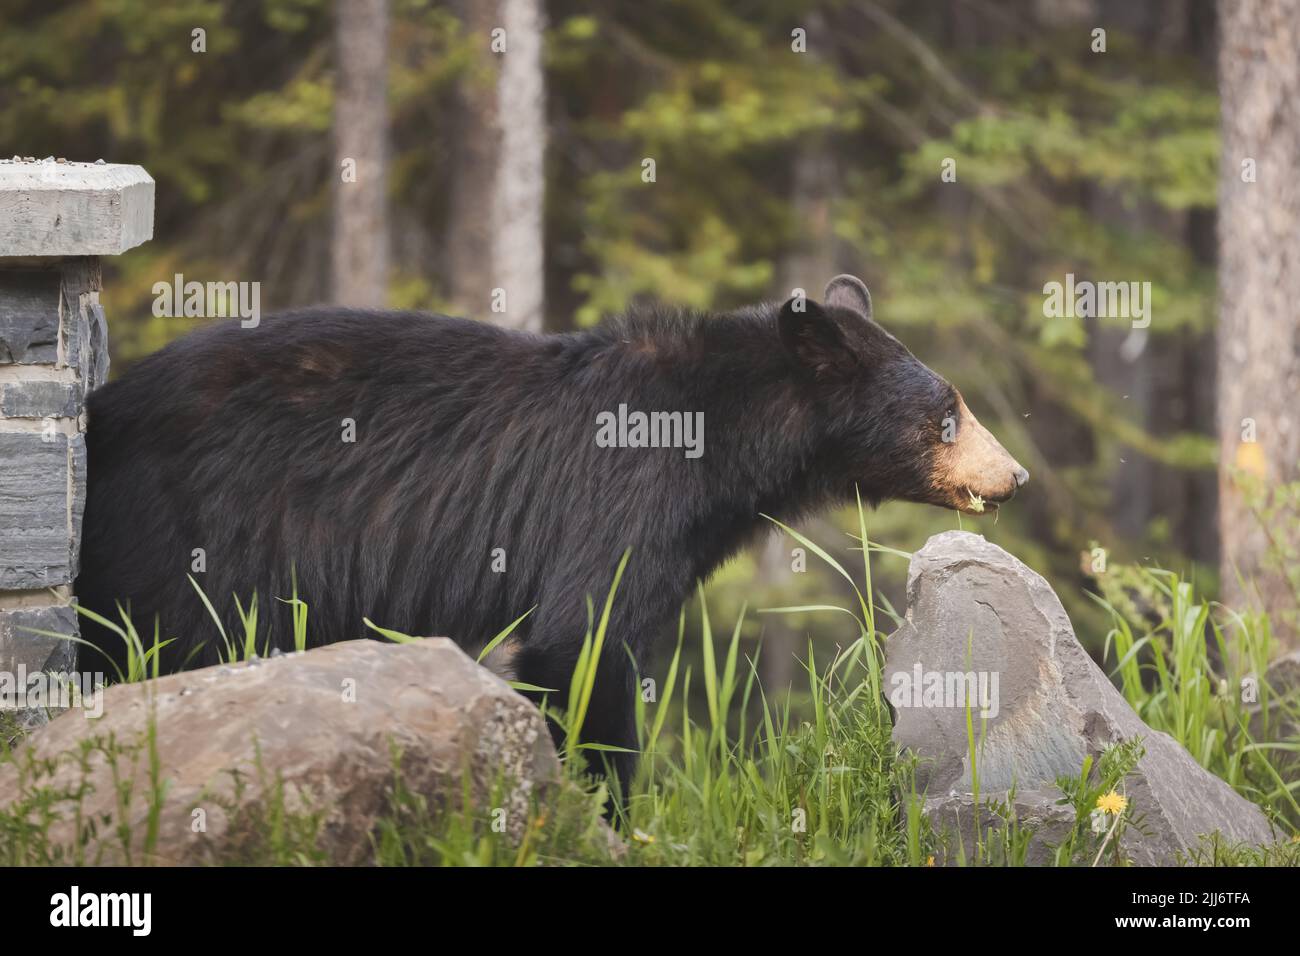 Wildlife portrait of a North American Black Bear (Ursus americanus), eating grass and dandelions in the outdoor wilderness of Banff National Park in t Stock Photo